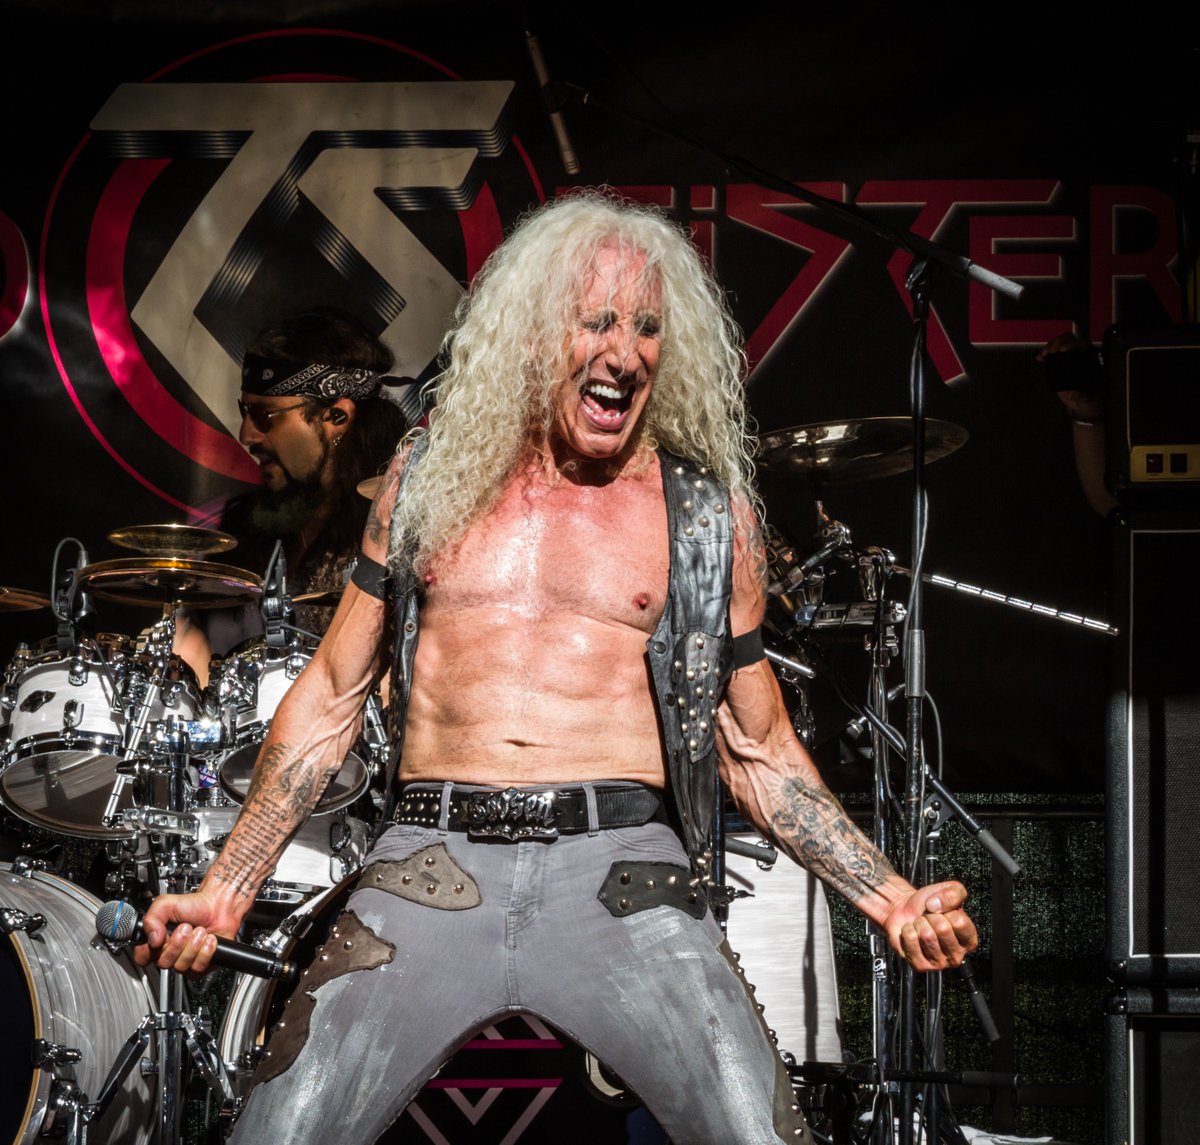 Dee first earned his popularity as the lead singer of the heavy metal band ...